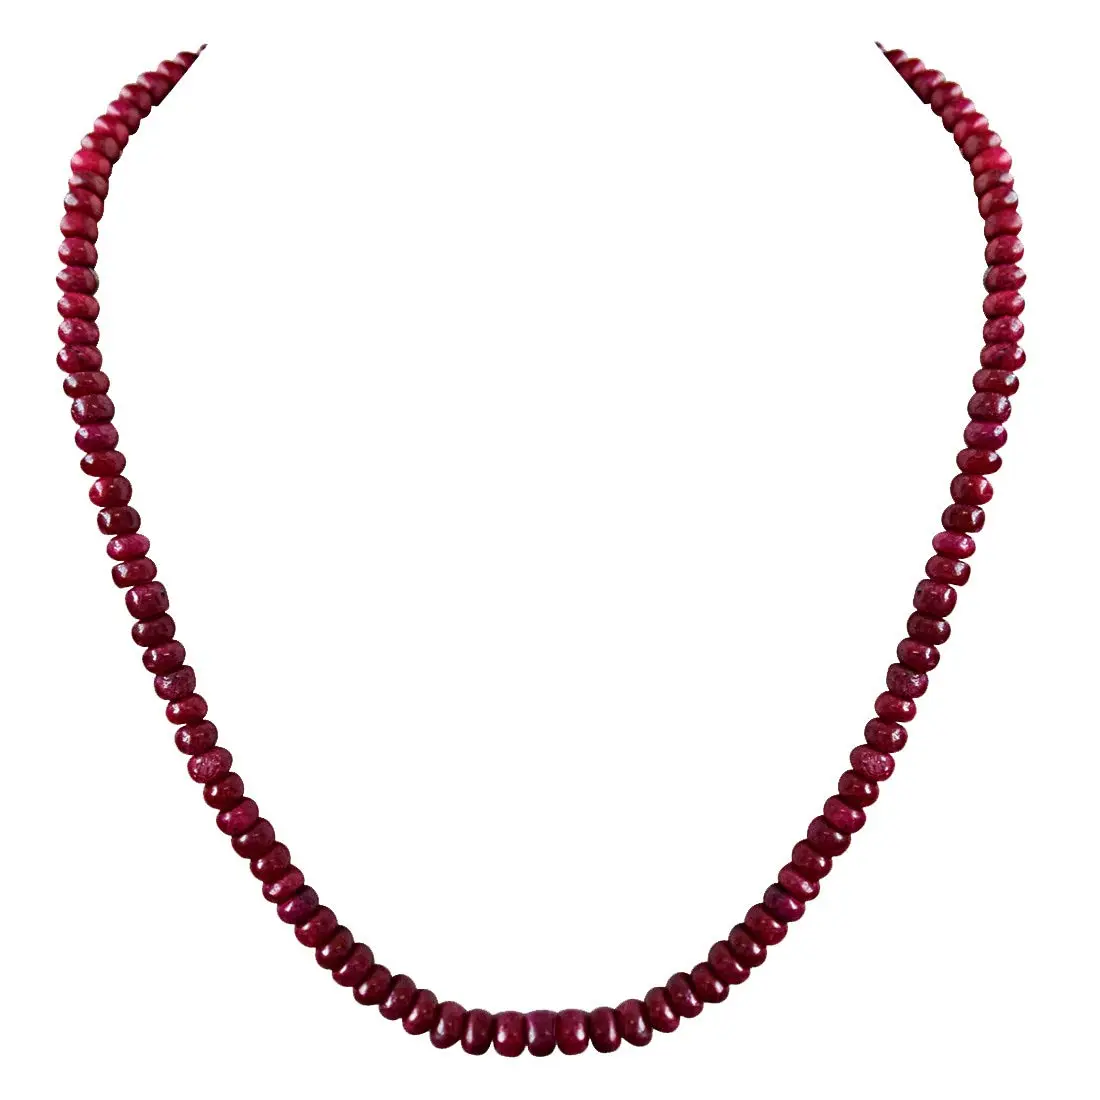 200cts Single Line Real Dark Maroon Pink Ruby Beads Necklace for Women (200ctsRubyNeck)